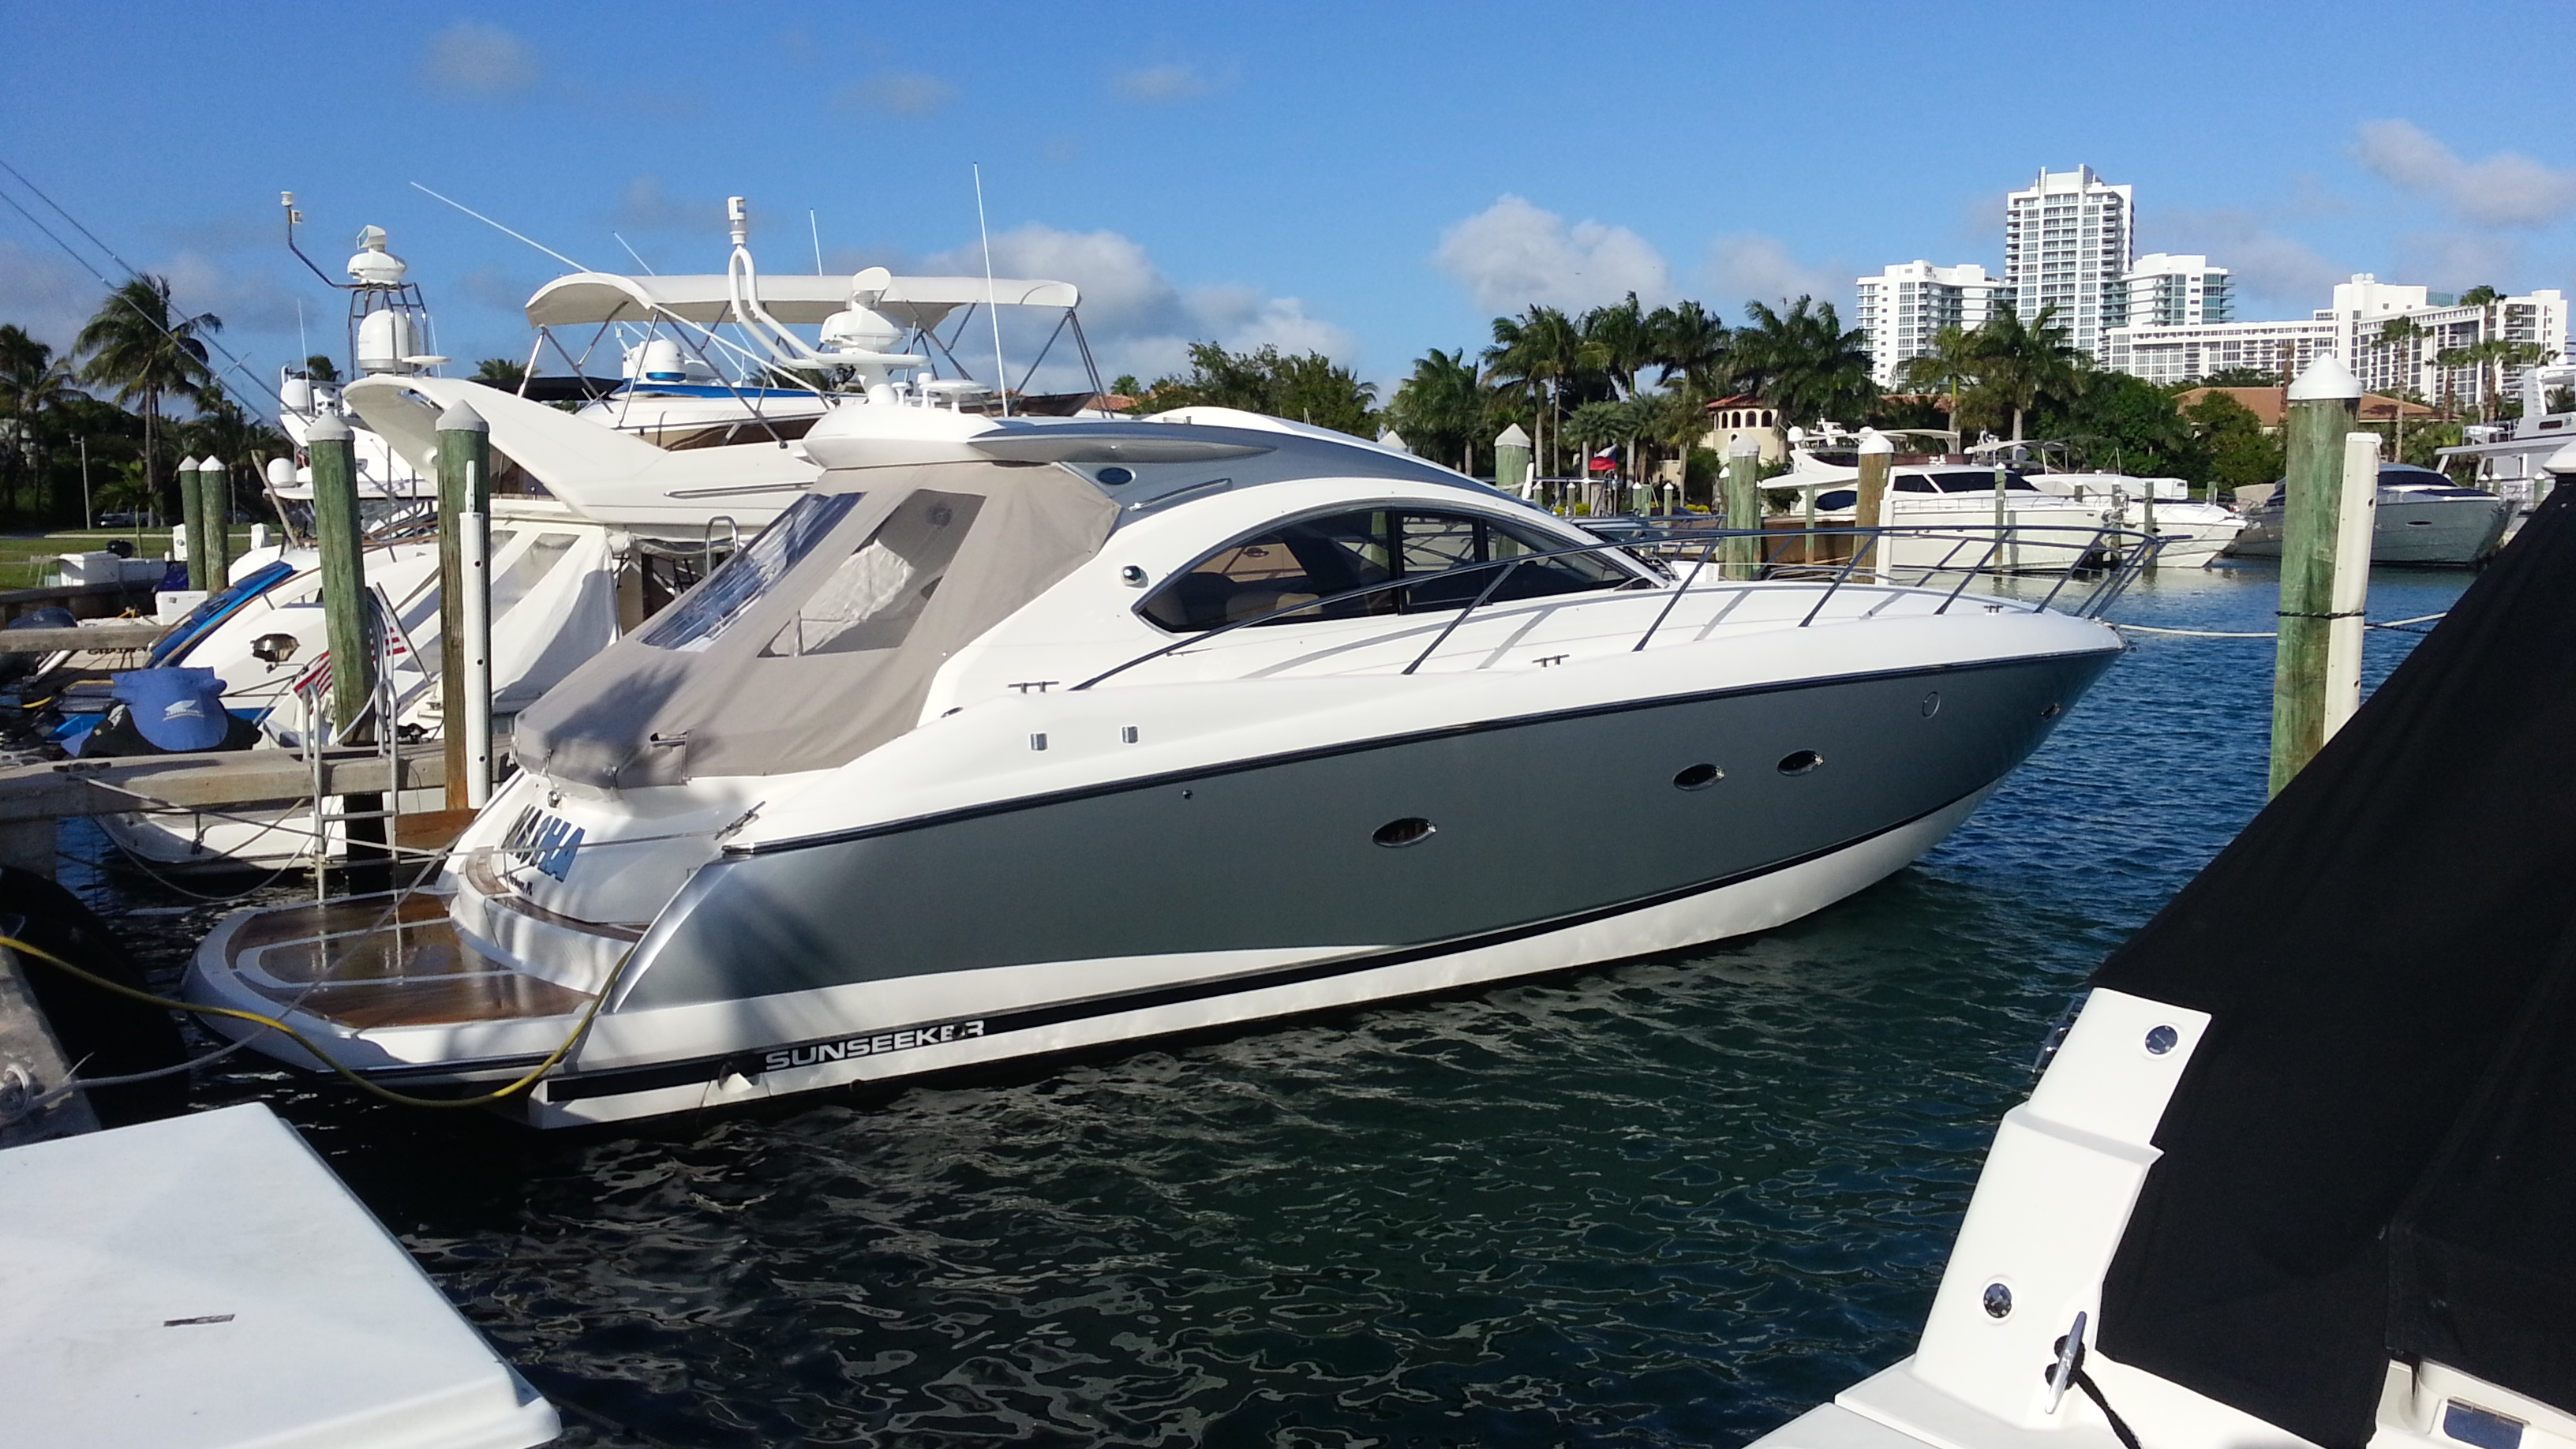 Florida Boat Wraps – High Quality Boat Wraps, Graphics ...